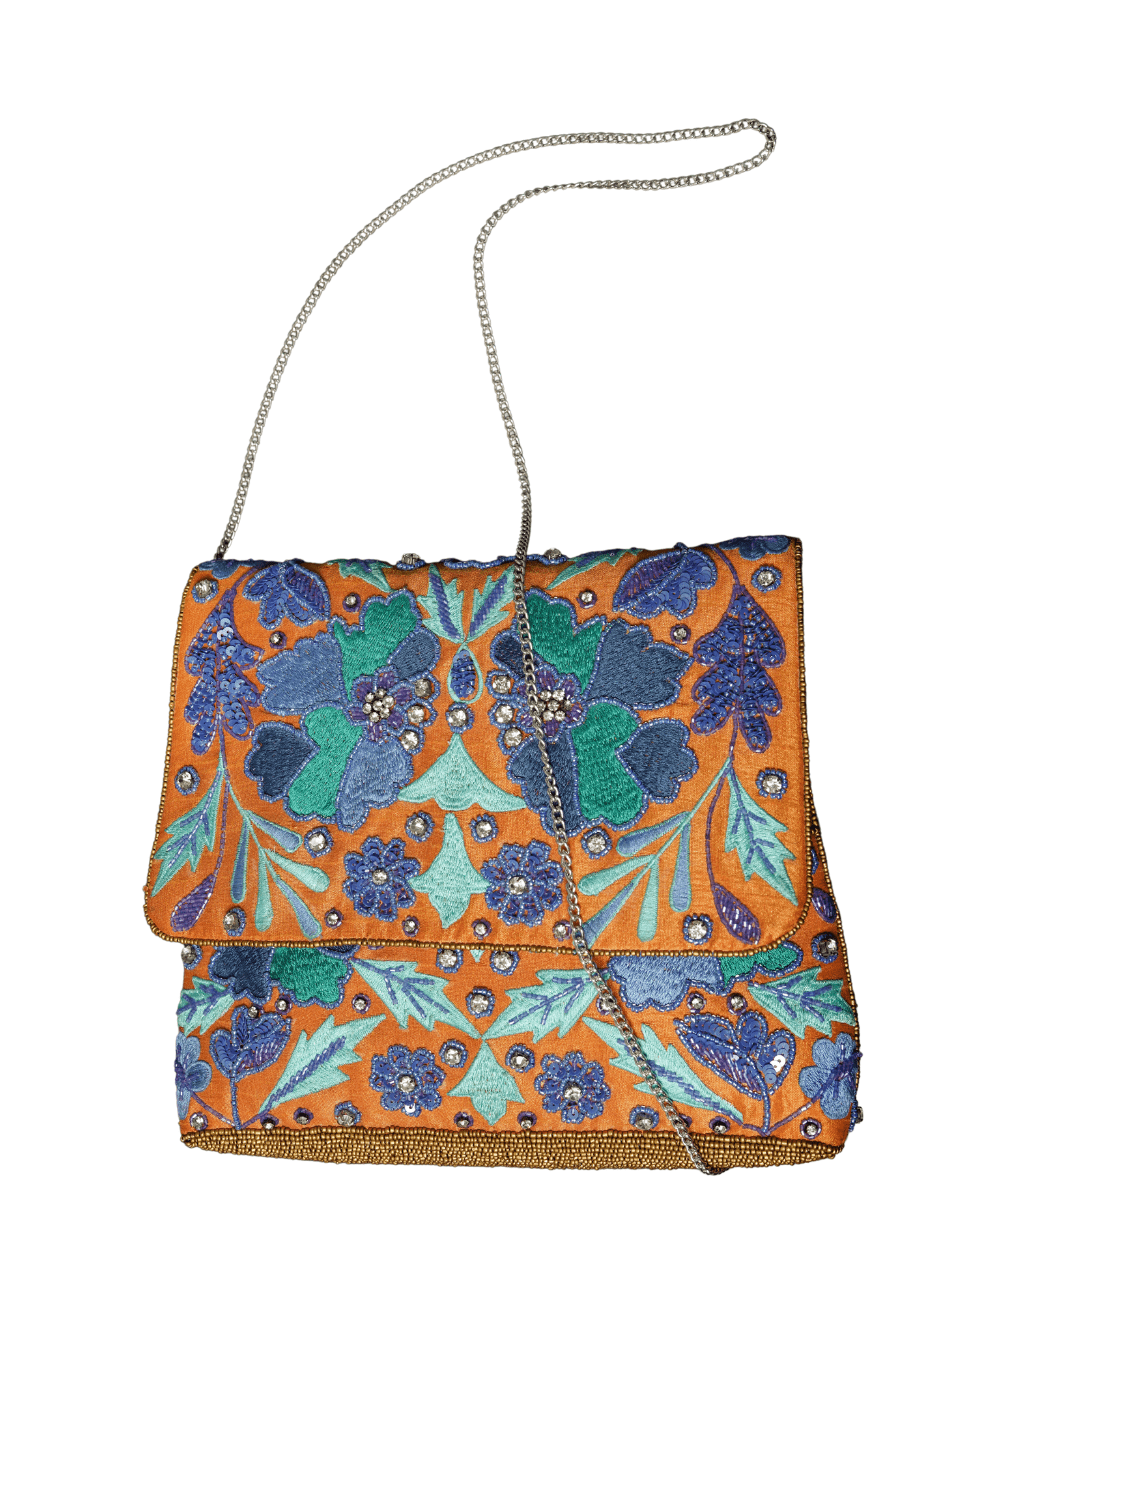 Orange-Blue Embroidered With Silver Chain Clutch Bag